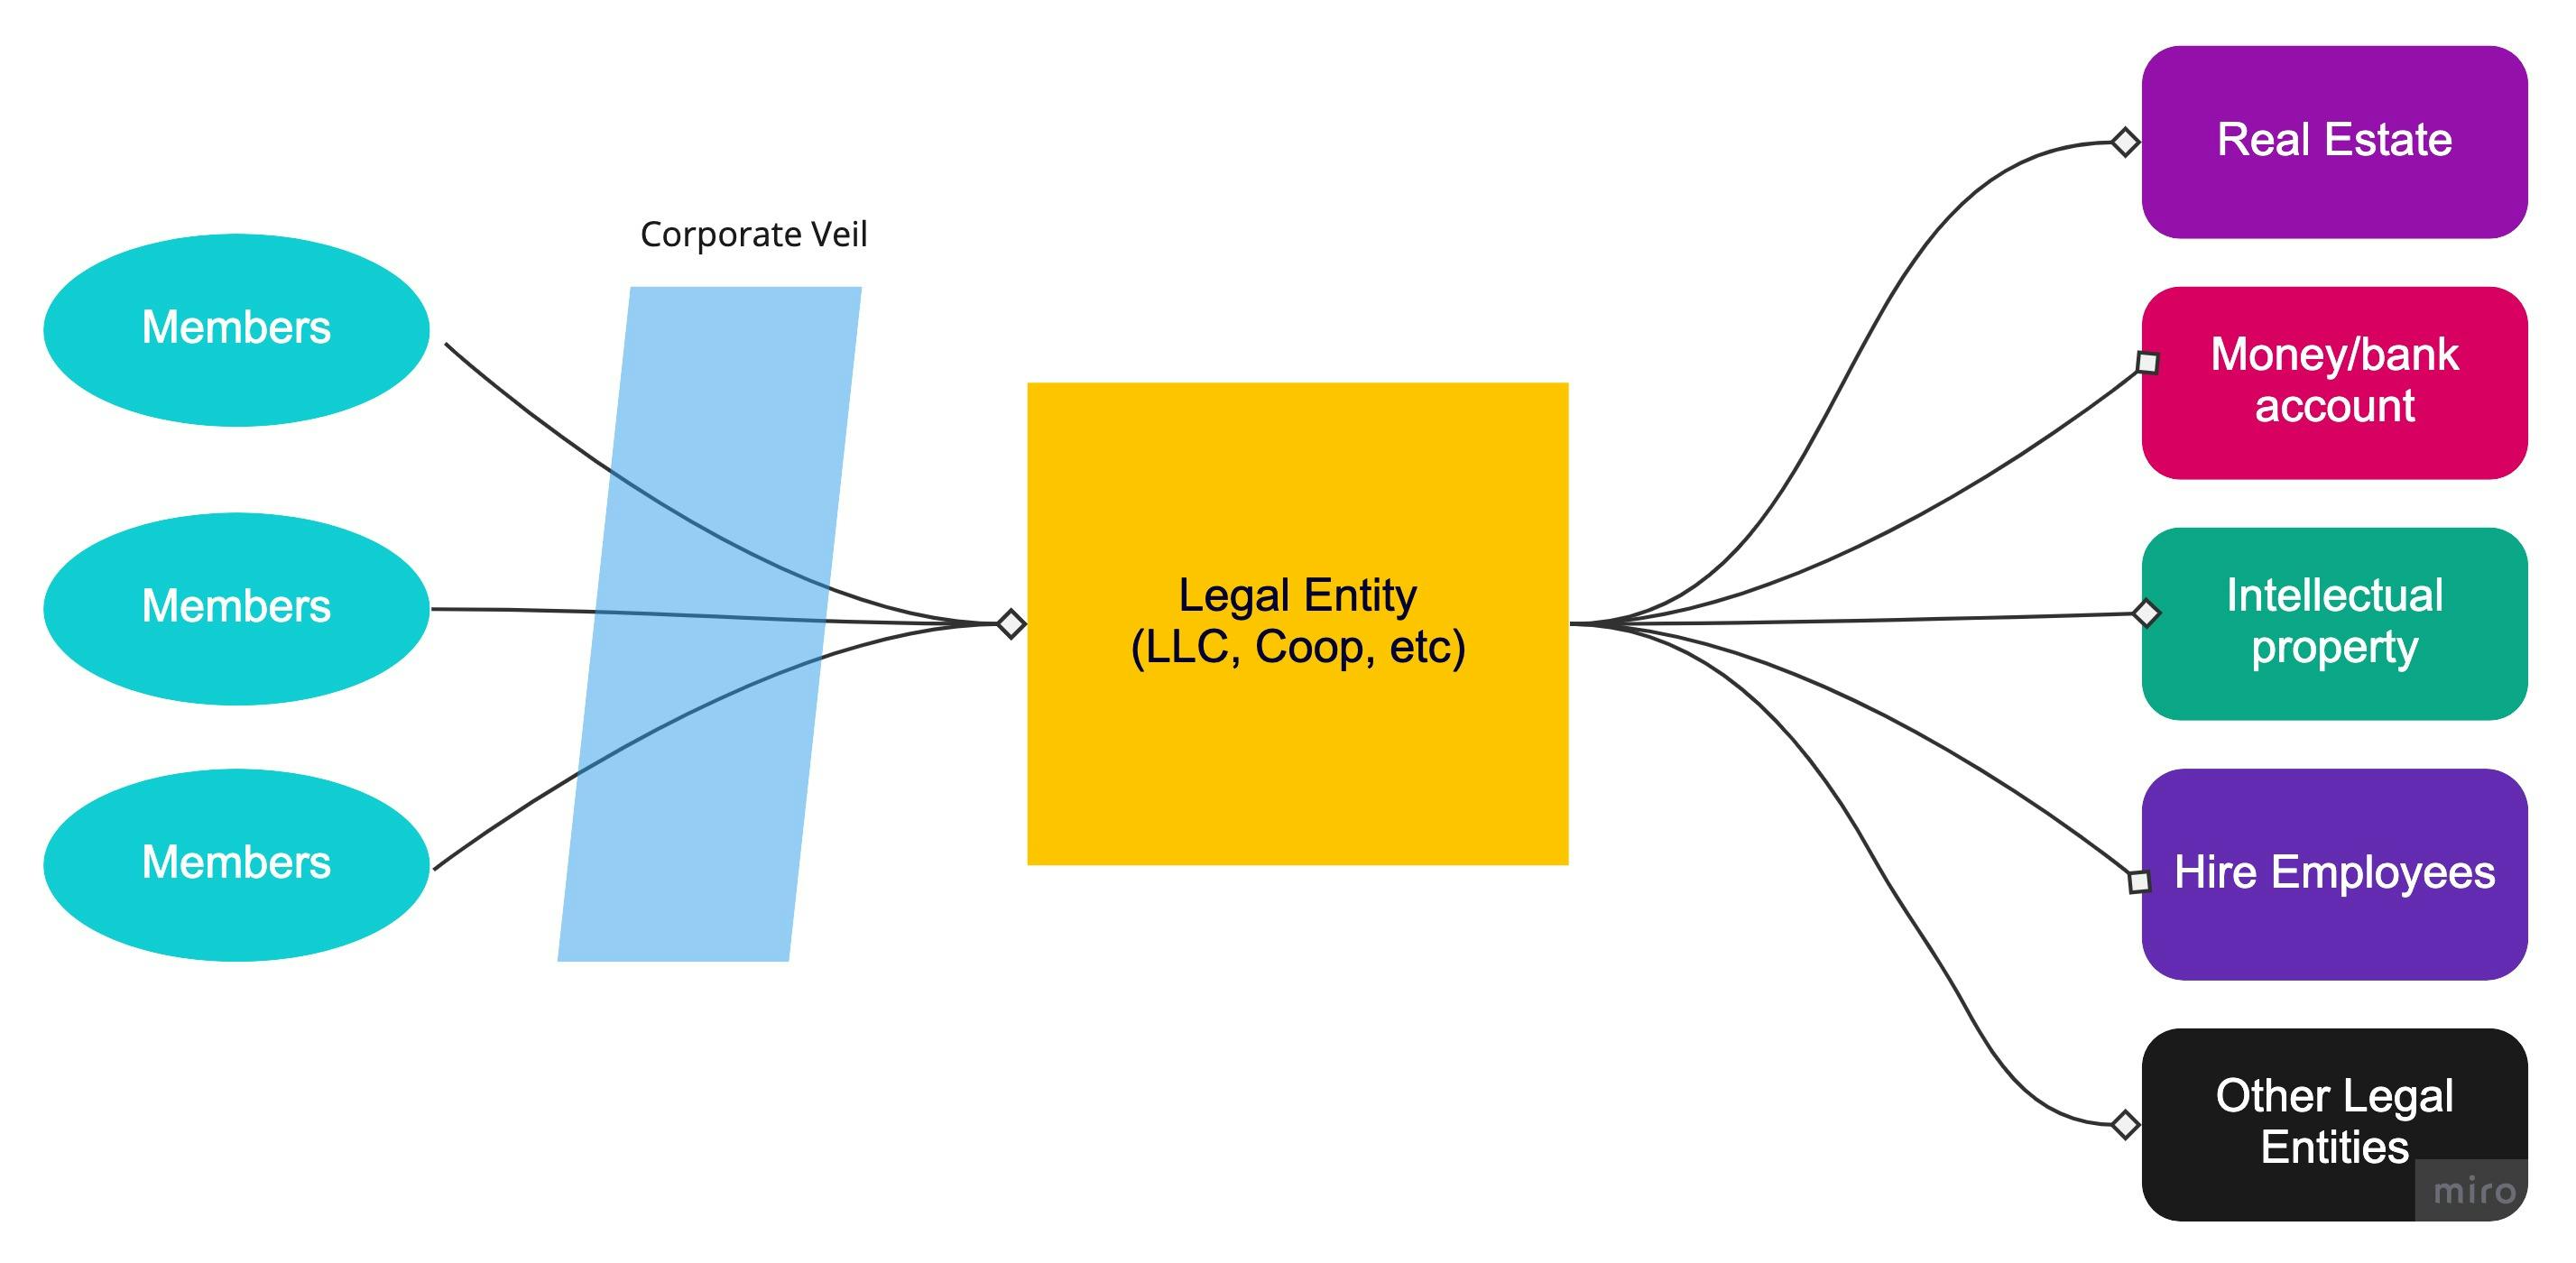 Legal entity ownership structure and corporate veil